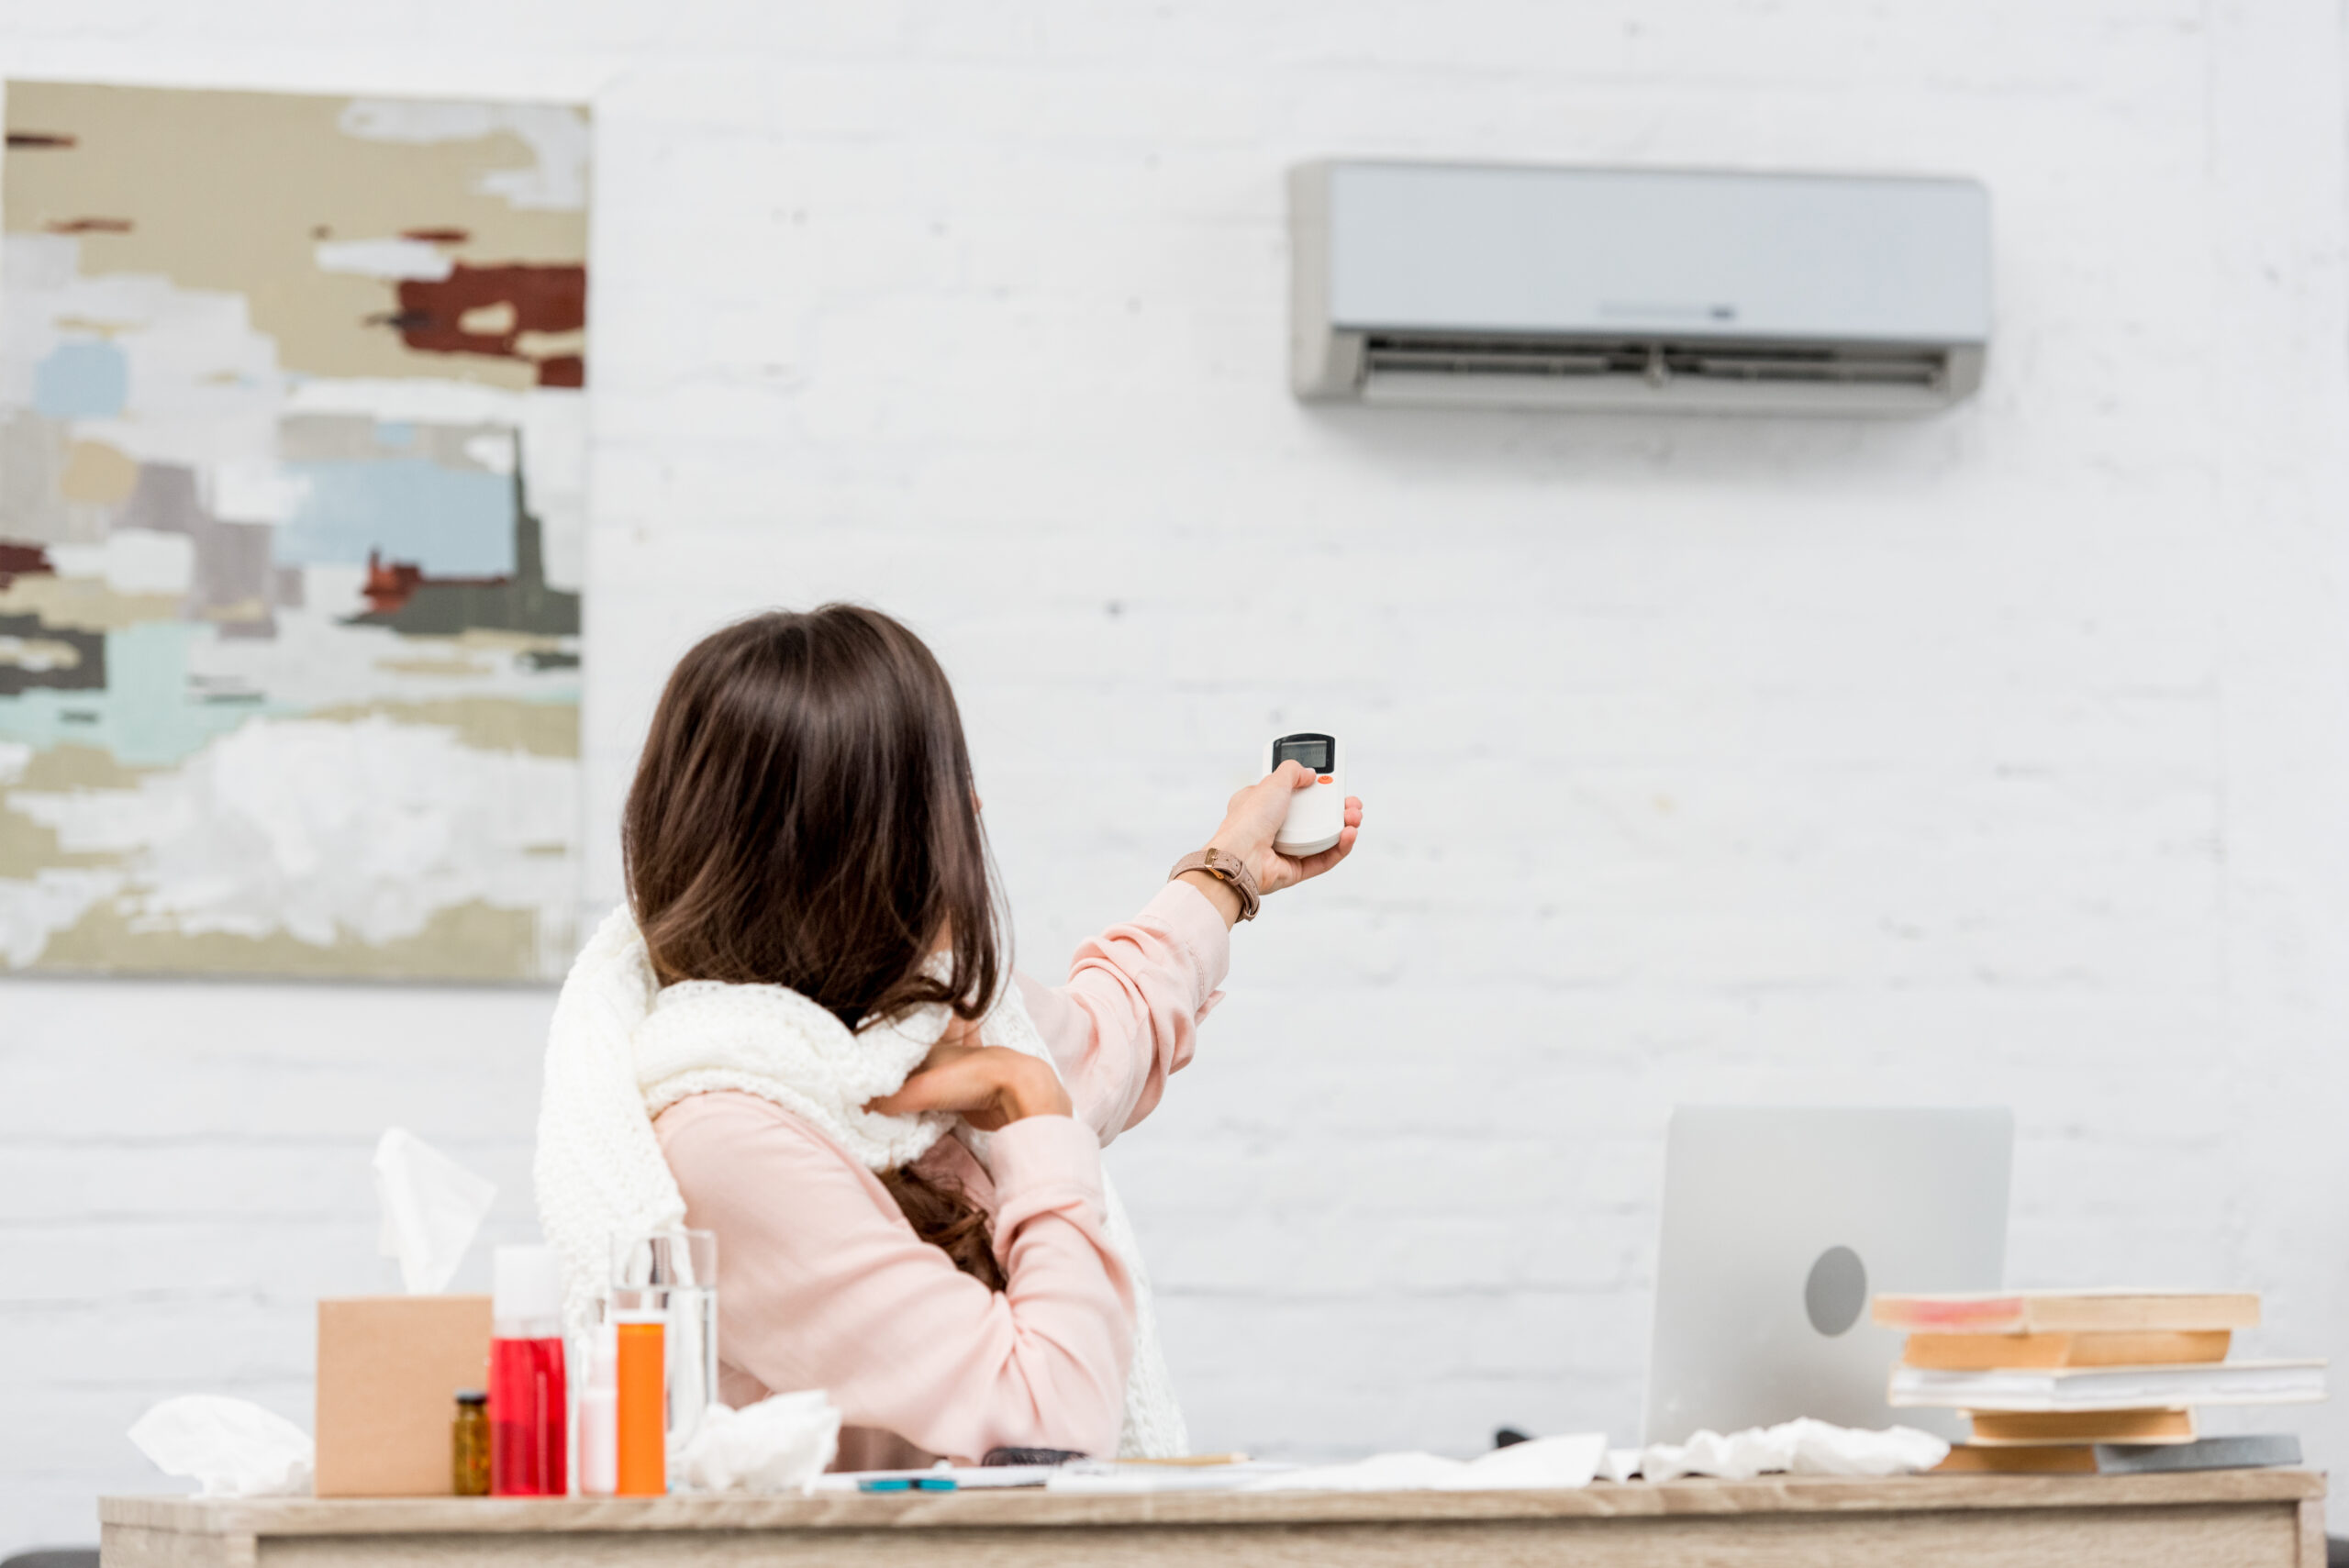 sick young woman sitting at workplace and pointing at air conditioner with remote control